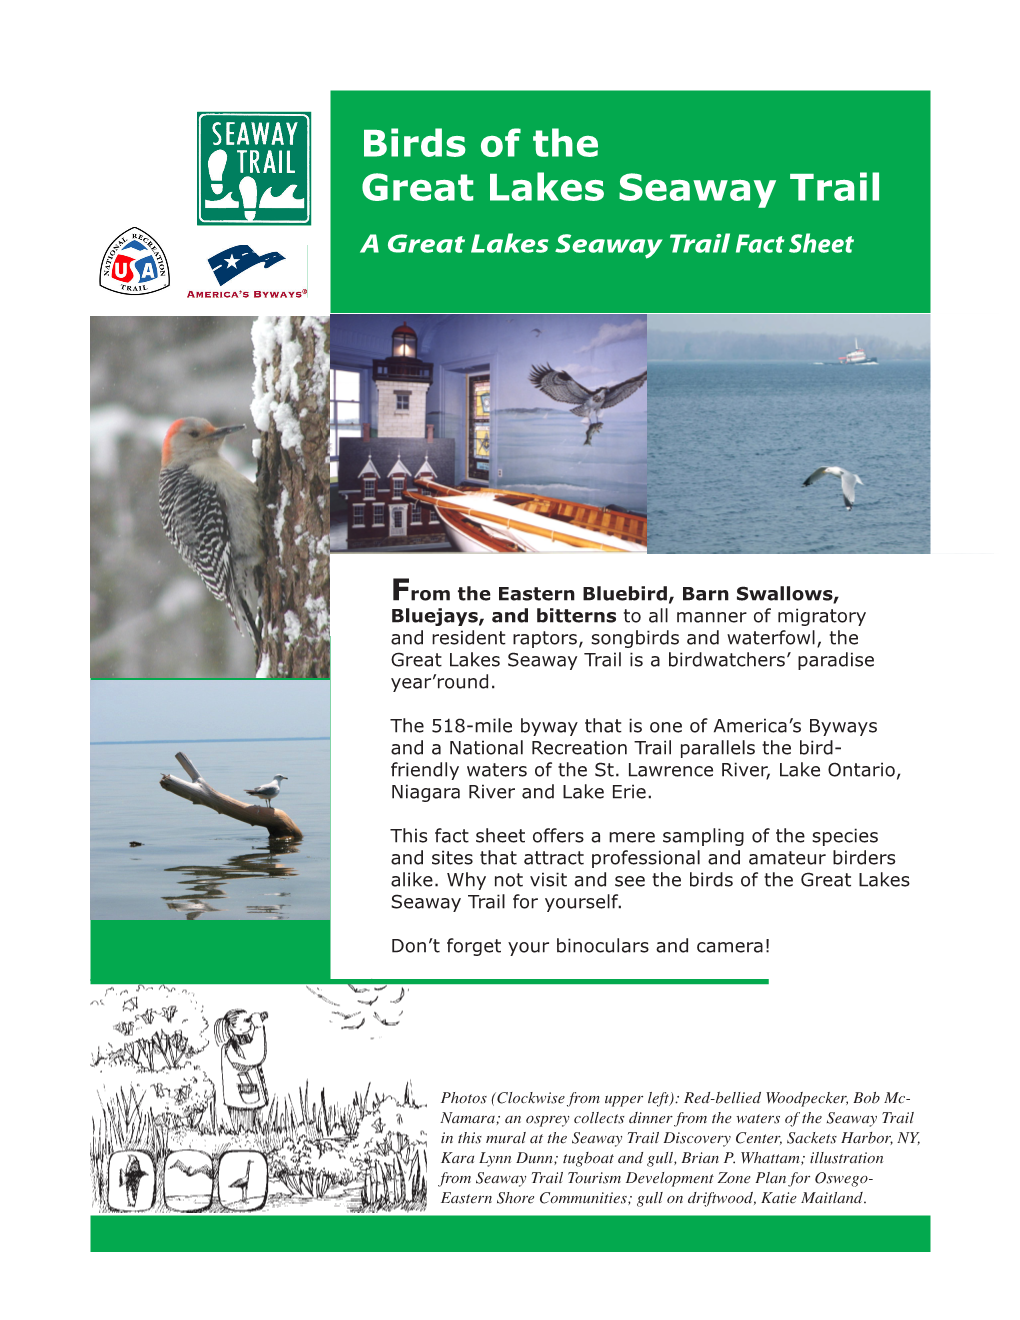 Birds of the Great Lakes Seaway Trail a Great Lakes Seaway Trail Fact Sheet